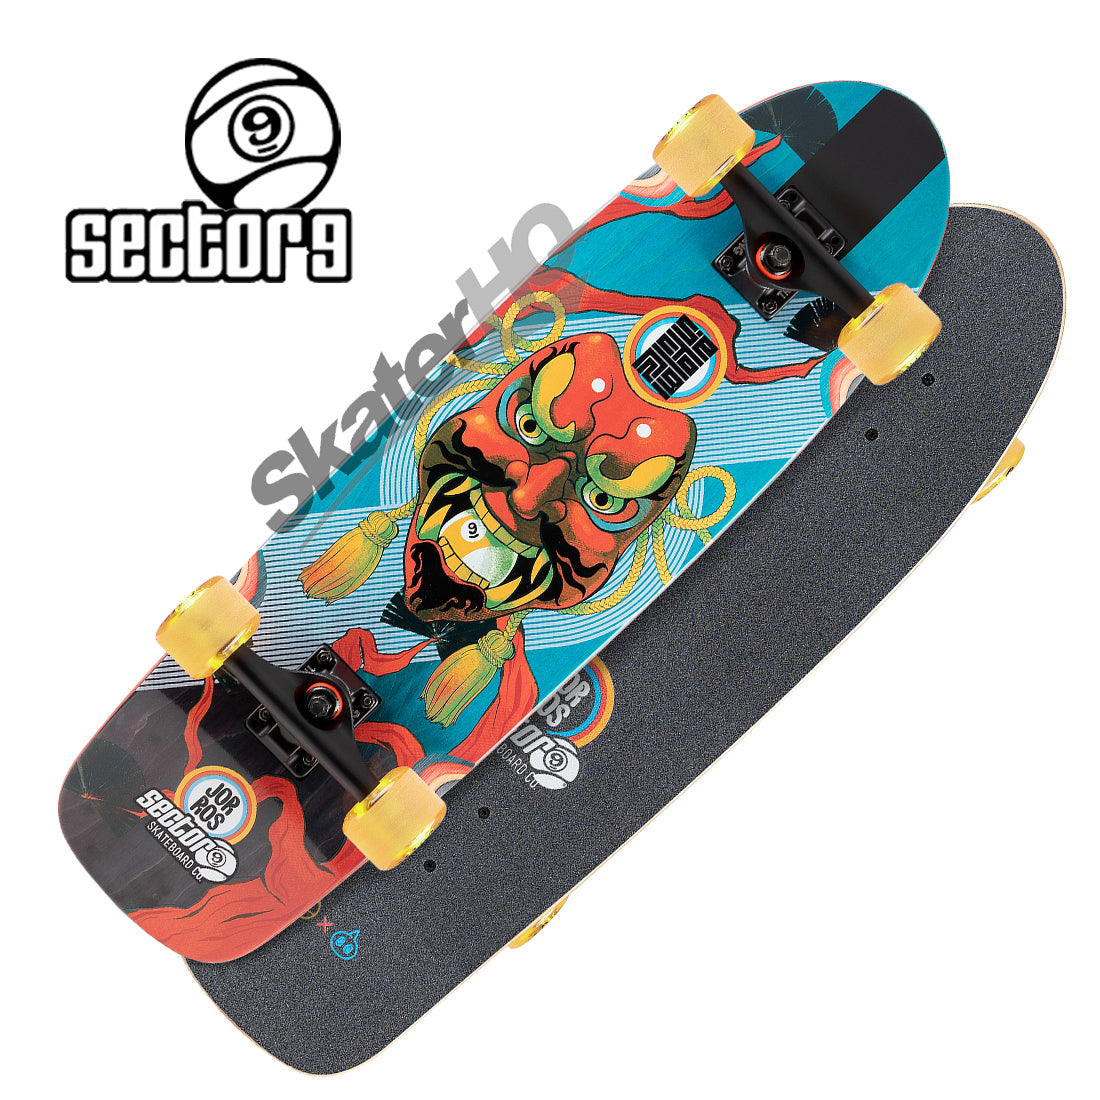 Sector 9 Chop Hop Noh 8.6x30.5 Complete - Red/Blue Skateboard Compl Cruisers